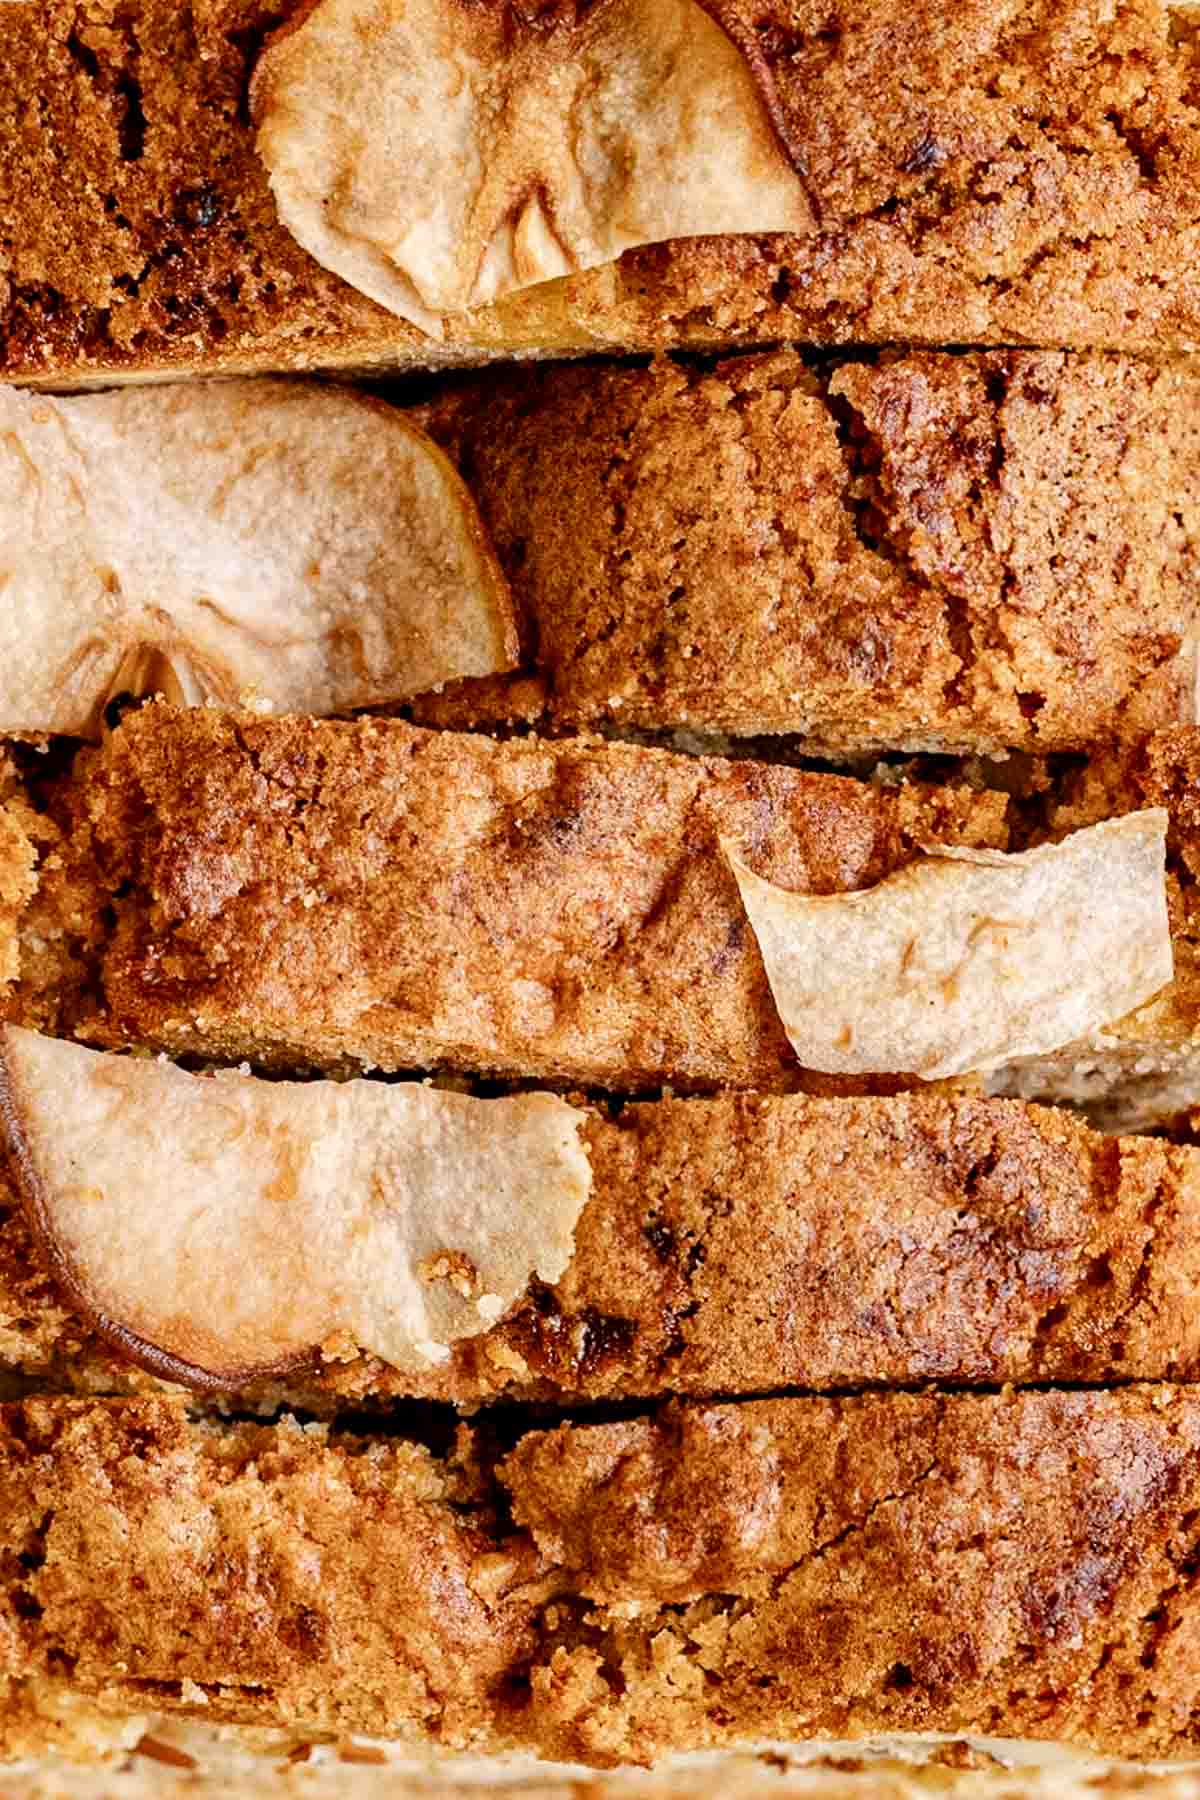 Pear Bread slices up close